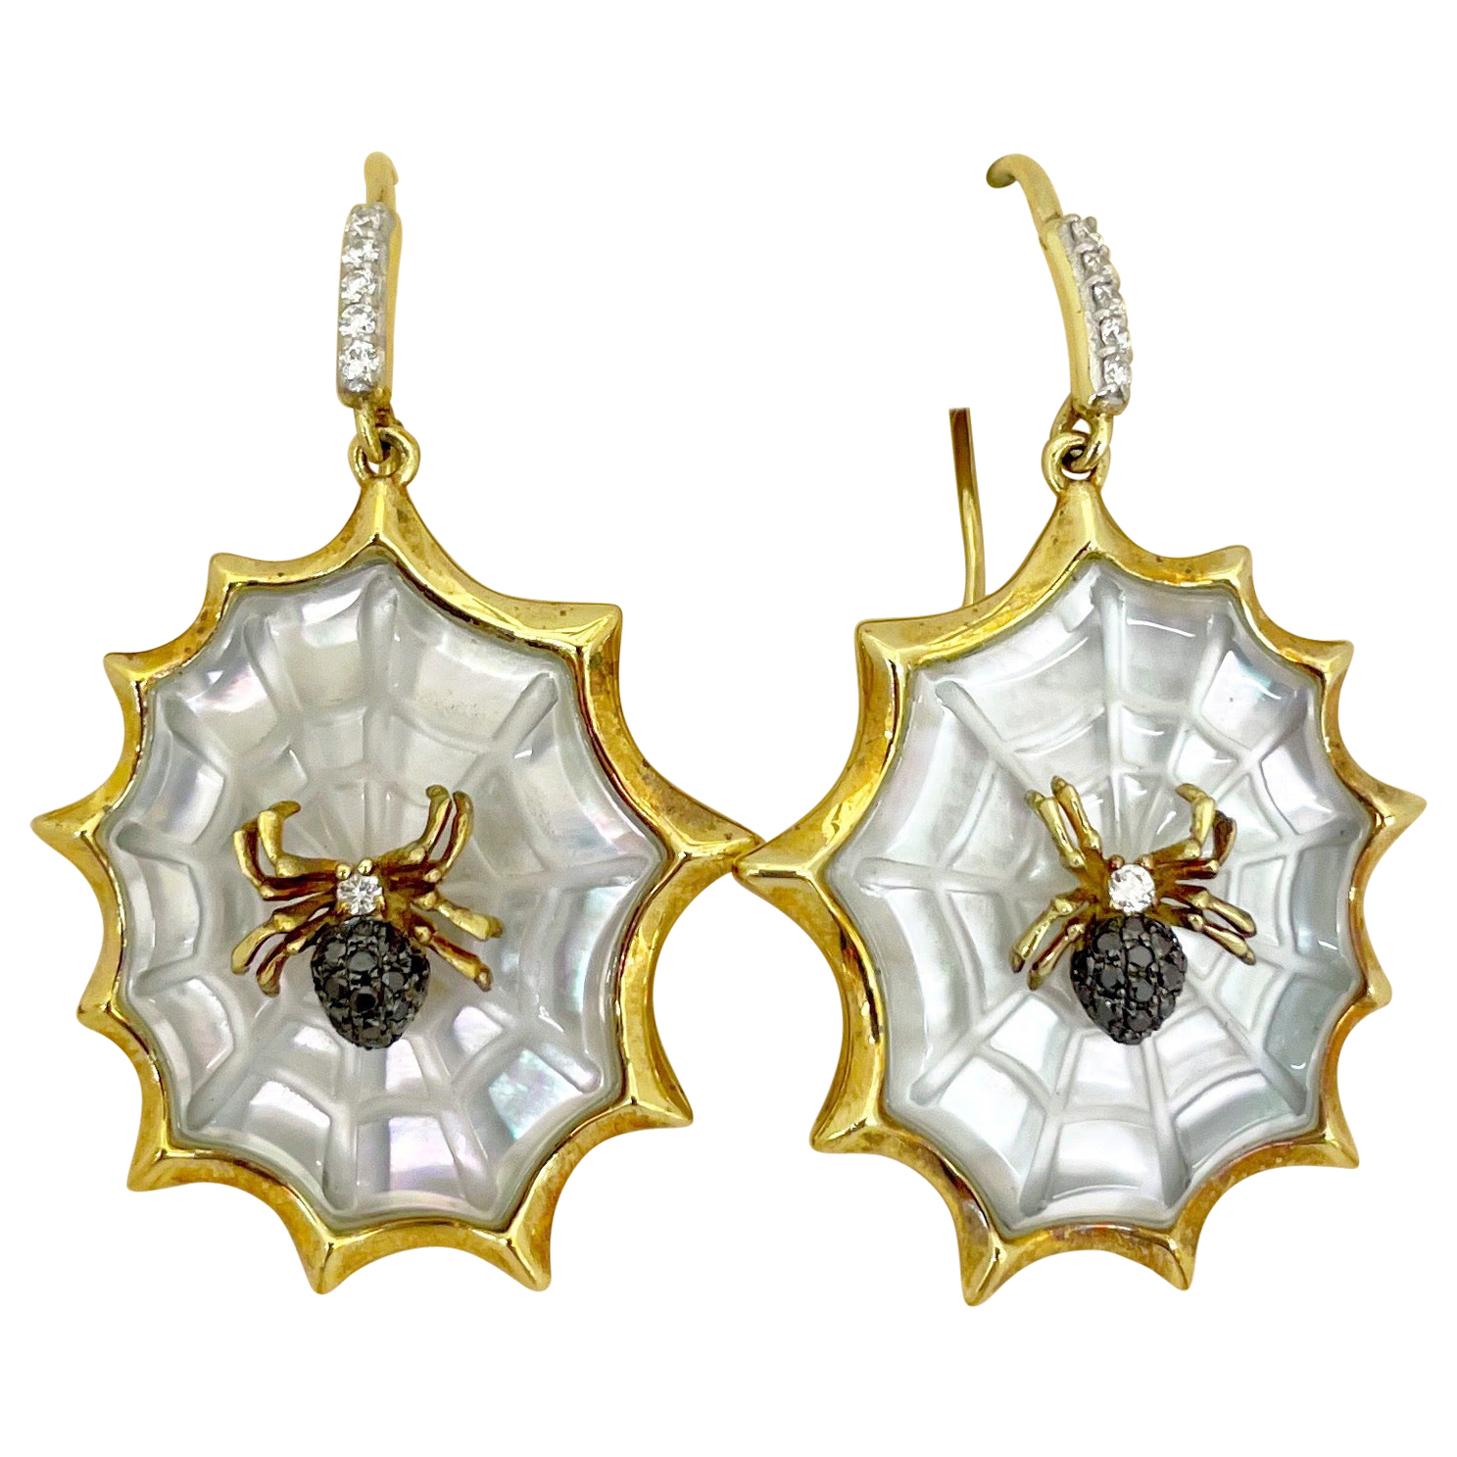 Asch Grossbardt 18KT YG Hanging Spider Web Earring Mother of Pearl and Diamond